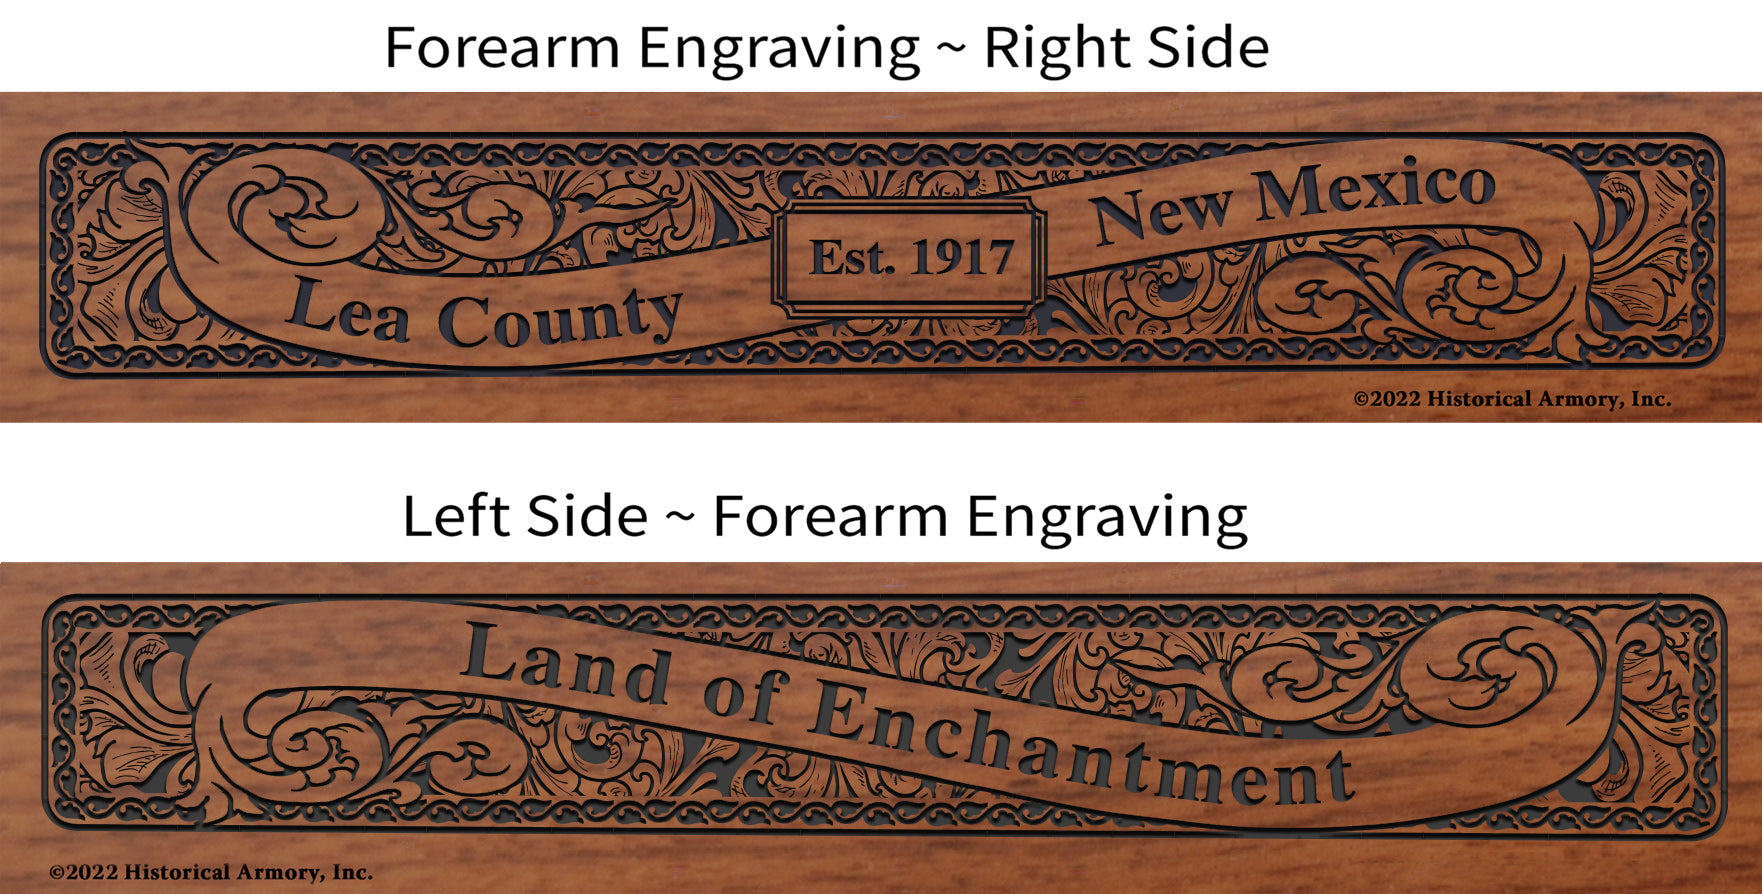 Lea County New Mexico Engraved Rifle Forearm